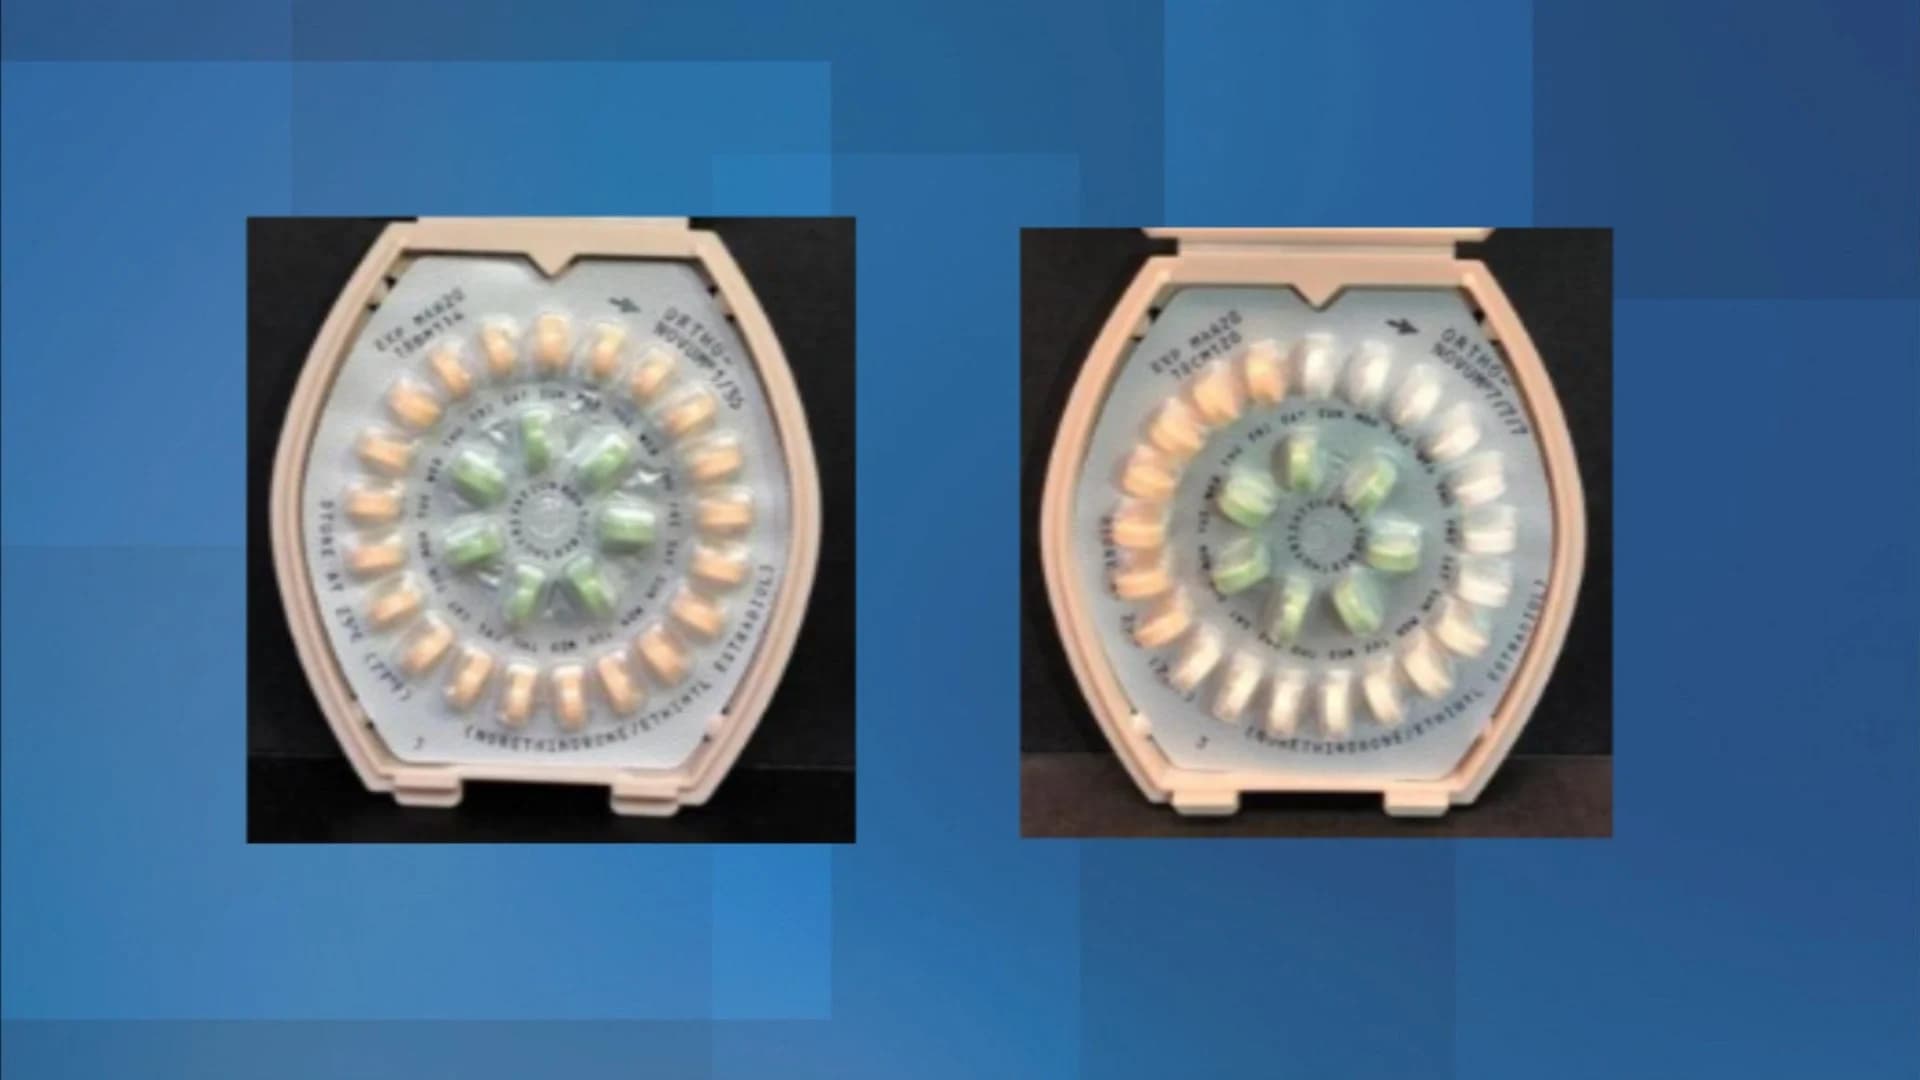 Recall issued for 3 lots of Ortho-Novum birth control